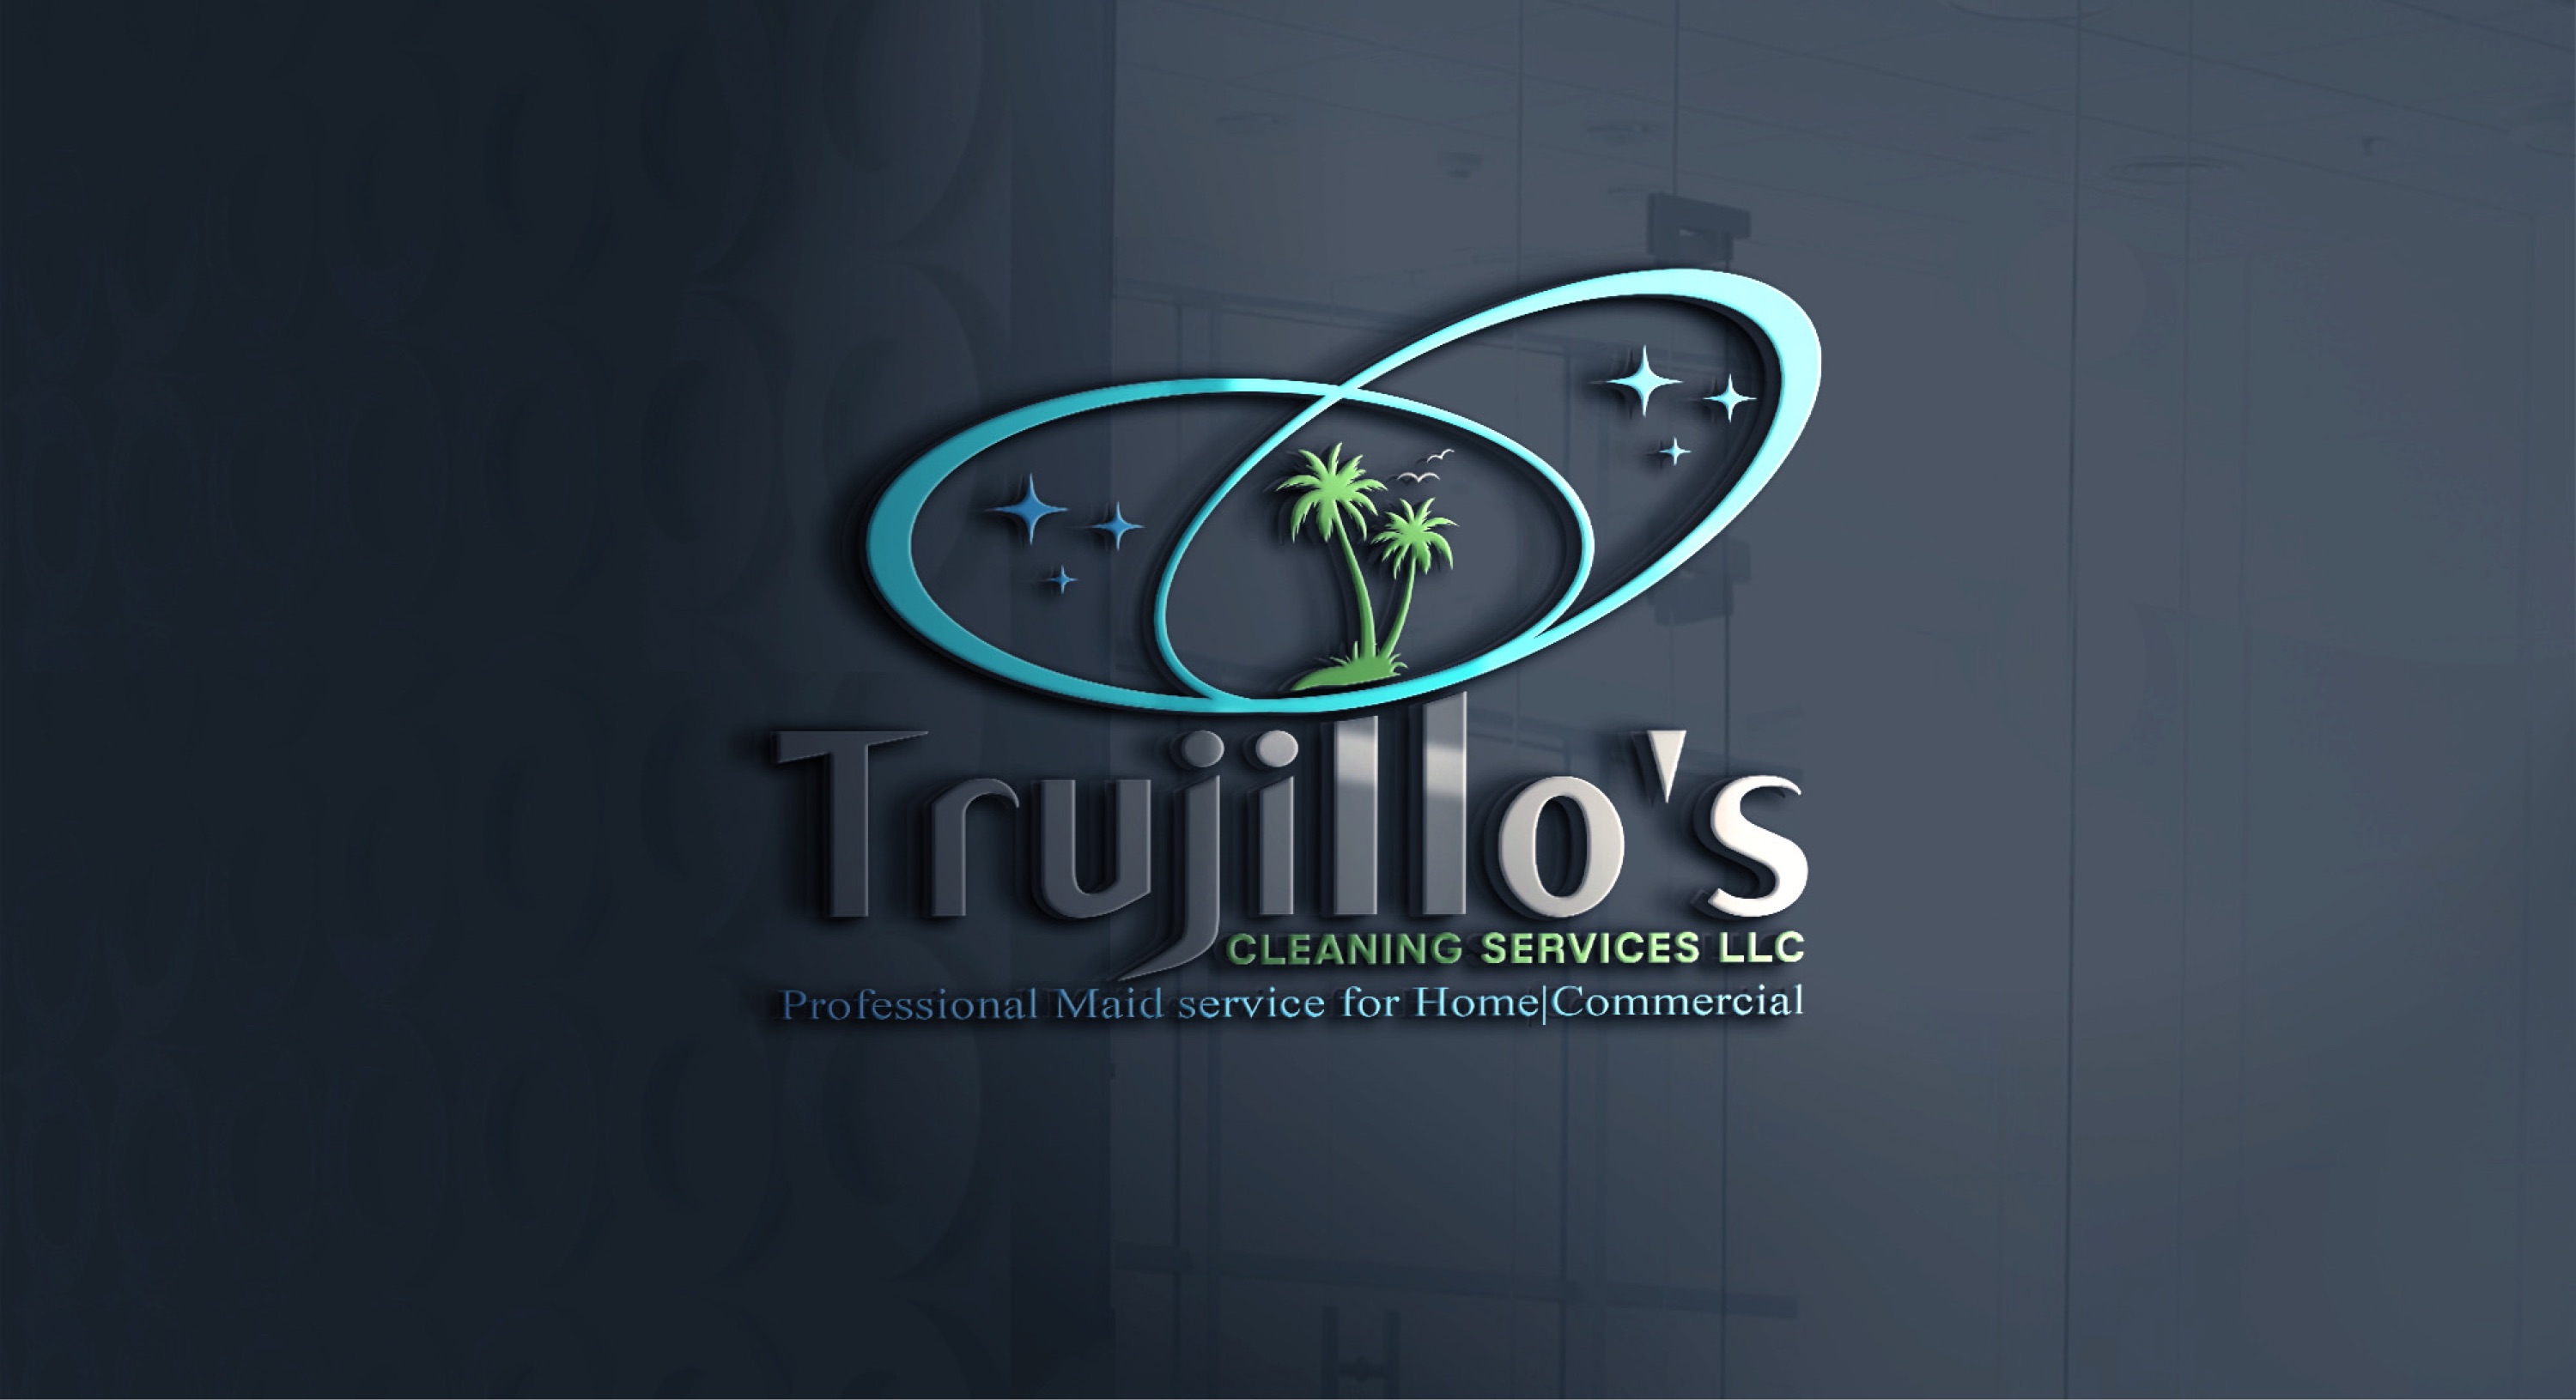 Trujillo's Cleaning Services LLC Logo